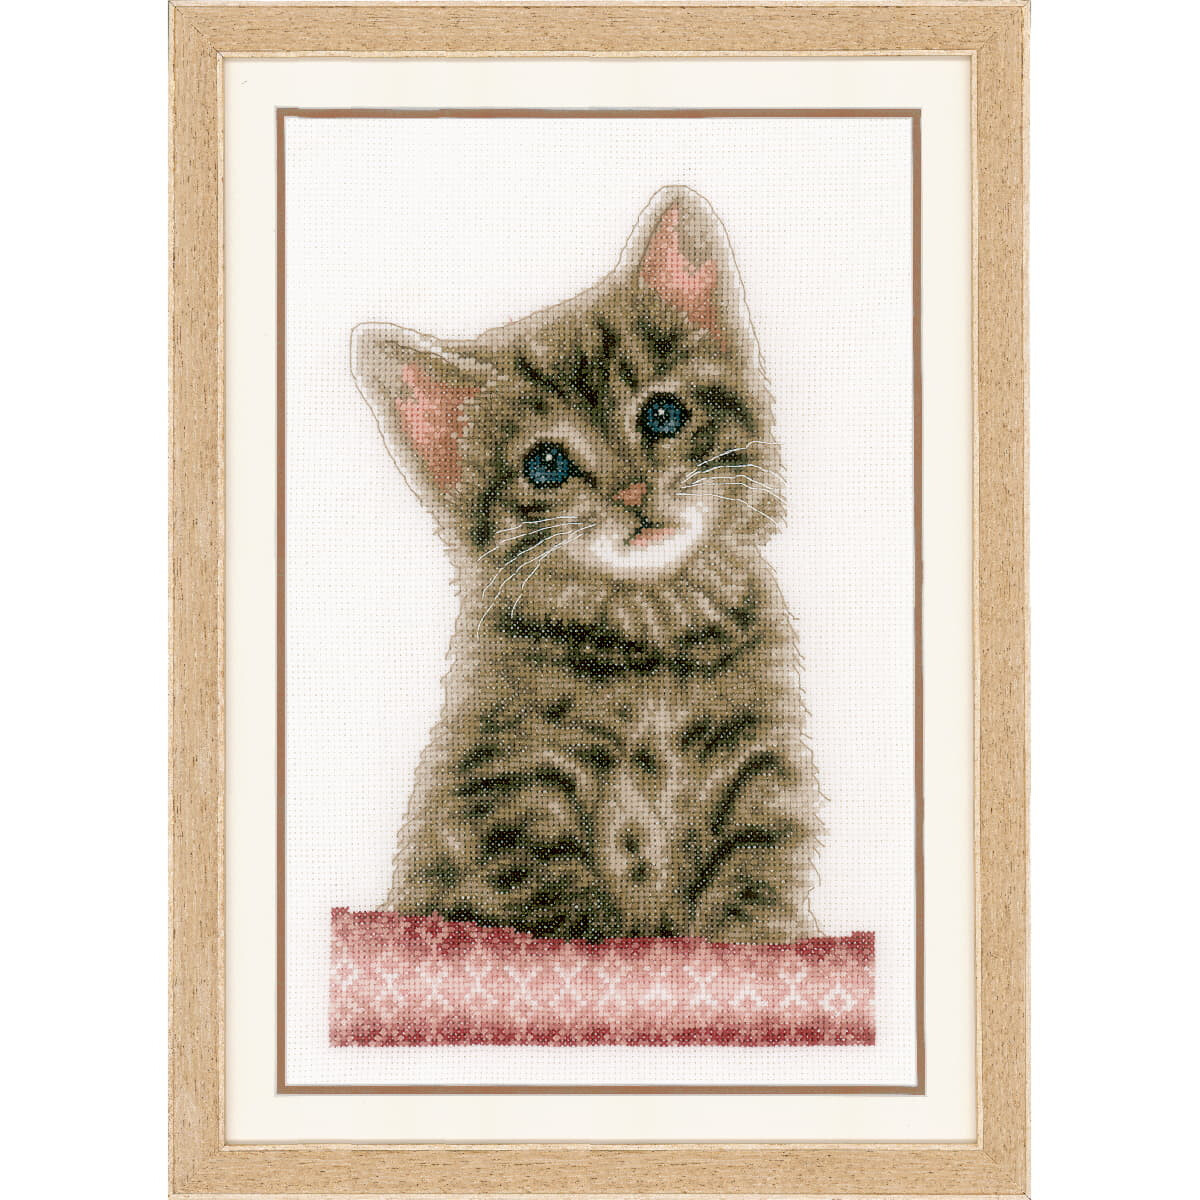 Vervaco counted cross stitch kit "Cat",...